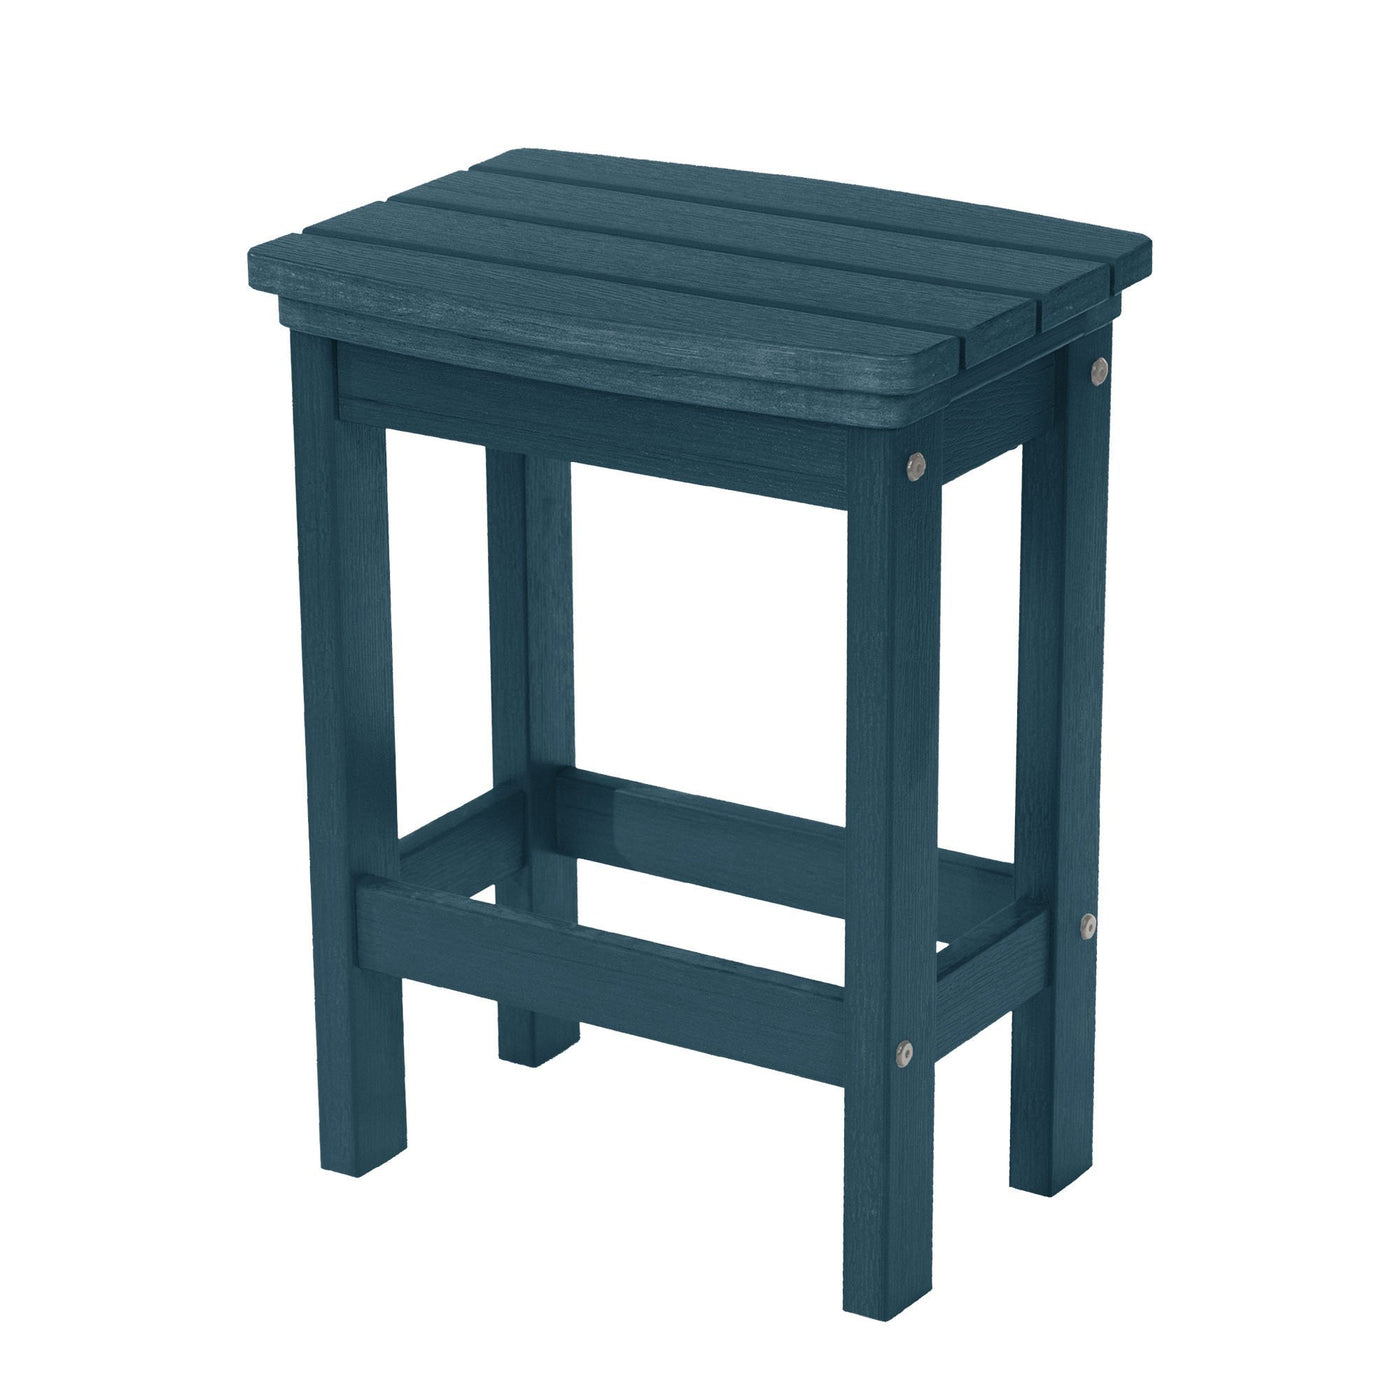 Back view of Lehigh counter height stool in Nantucket blue